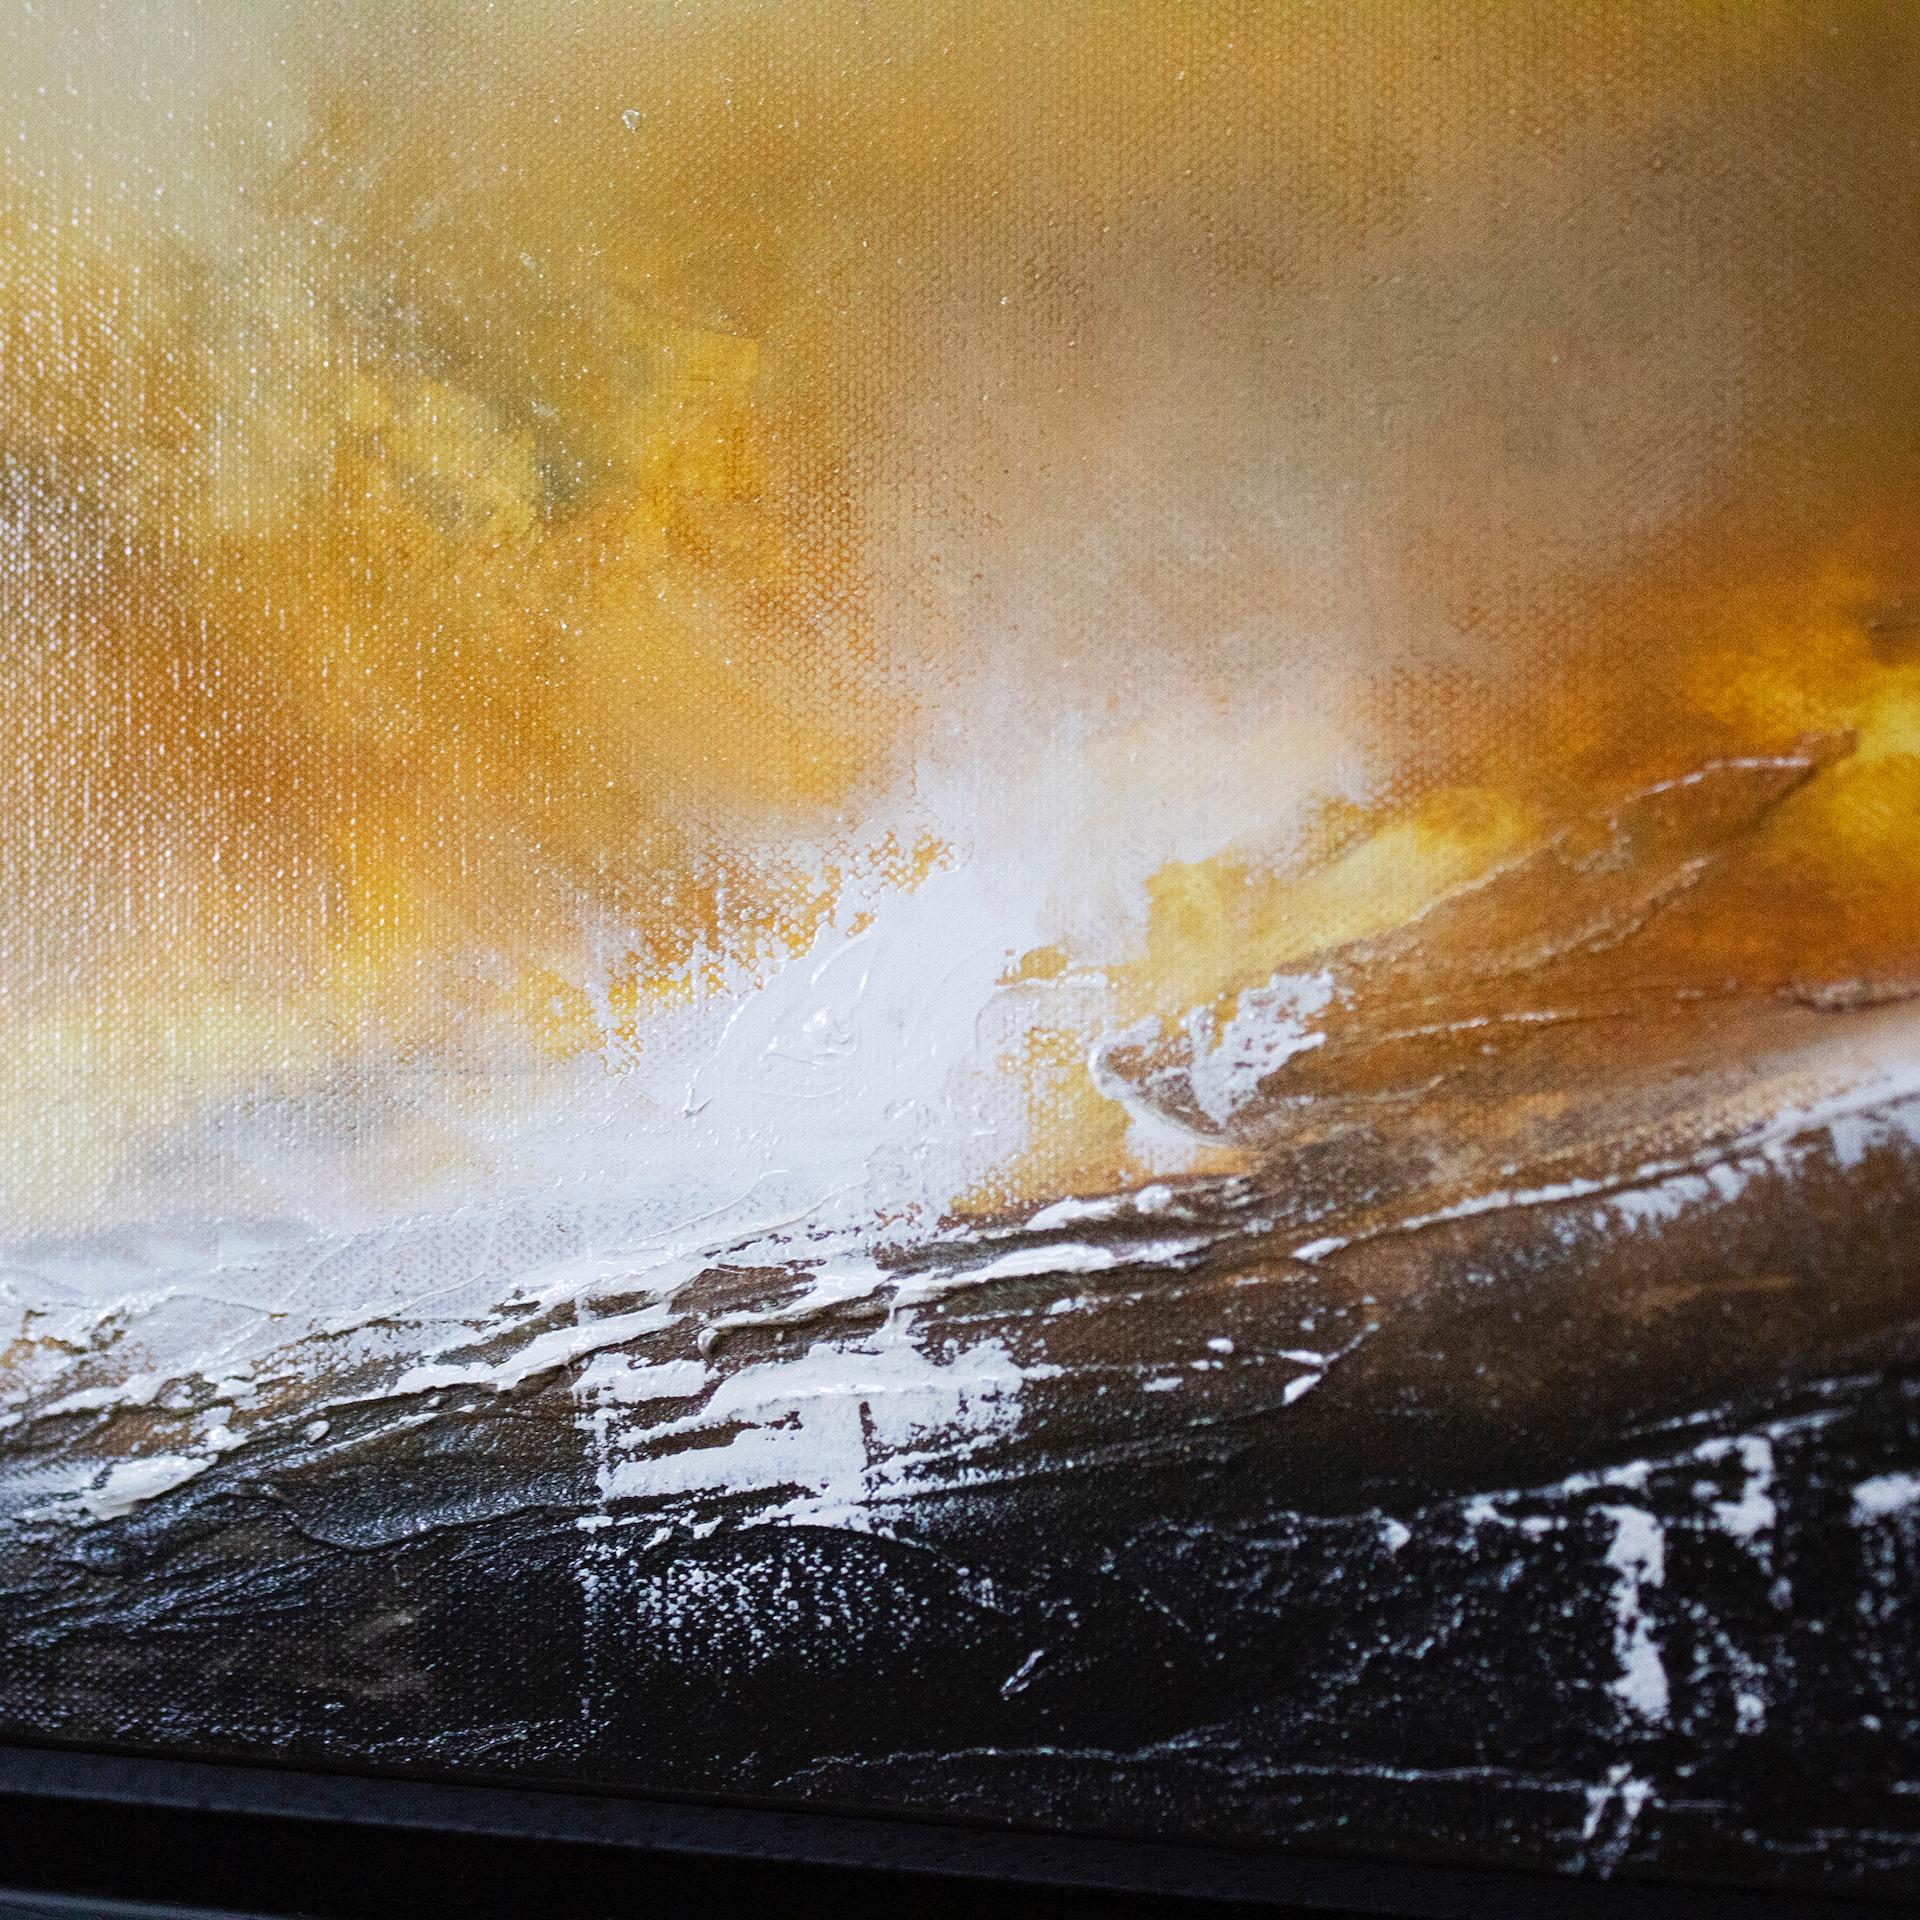 Sheryl Roberts
Radiant Outbreak
Original Seascape Painting
Oil and Acrylic Paint on Canvas
Size: H 53cm x W 133cm 
Sold Framed in a Black Box Frame
Please note that in situ images are purely an indication of how a piece may look.

Radiant Outbreak